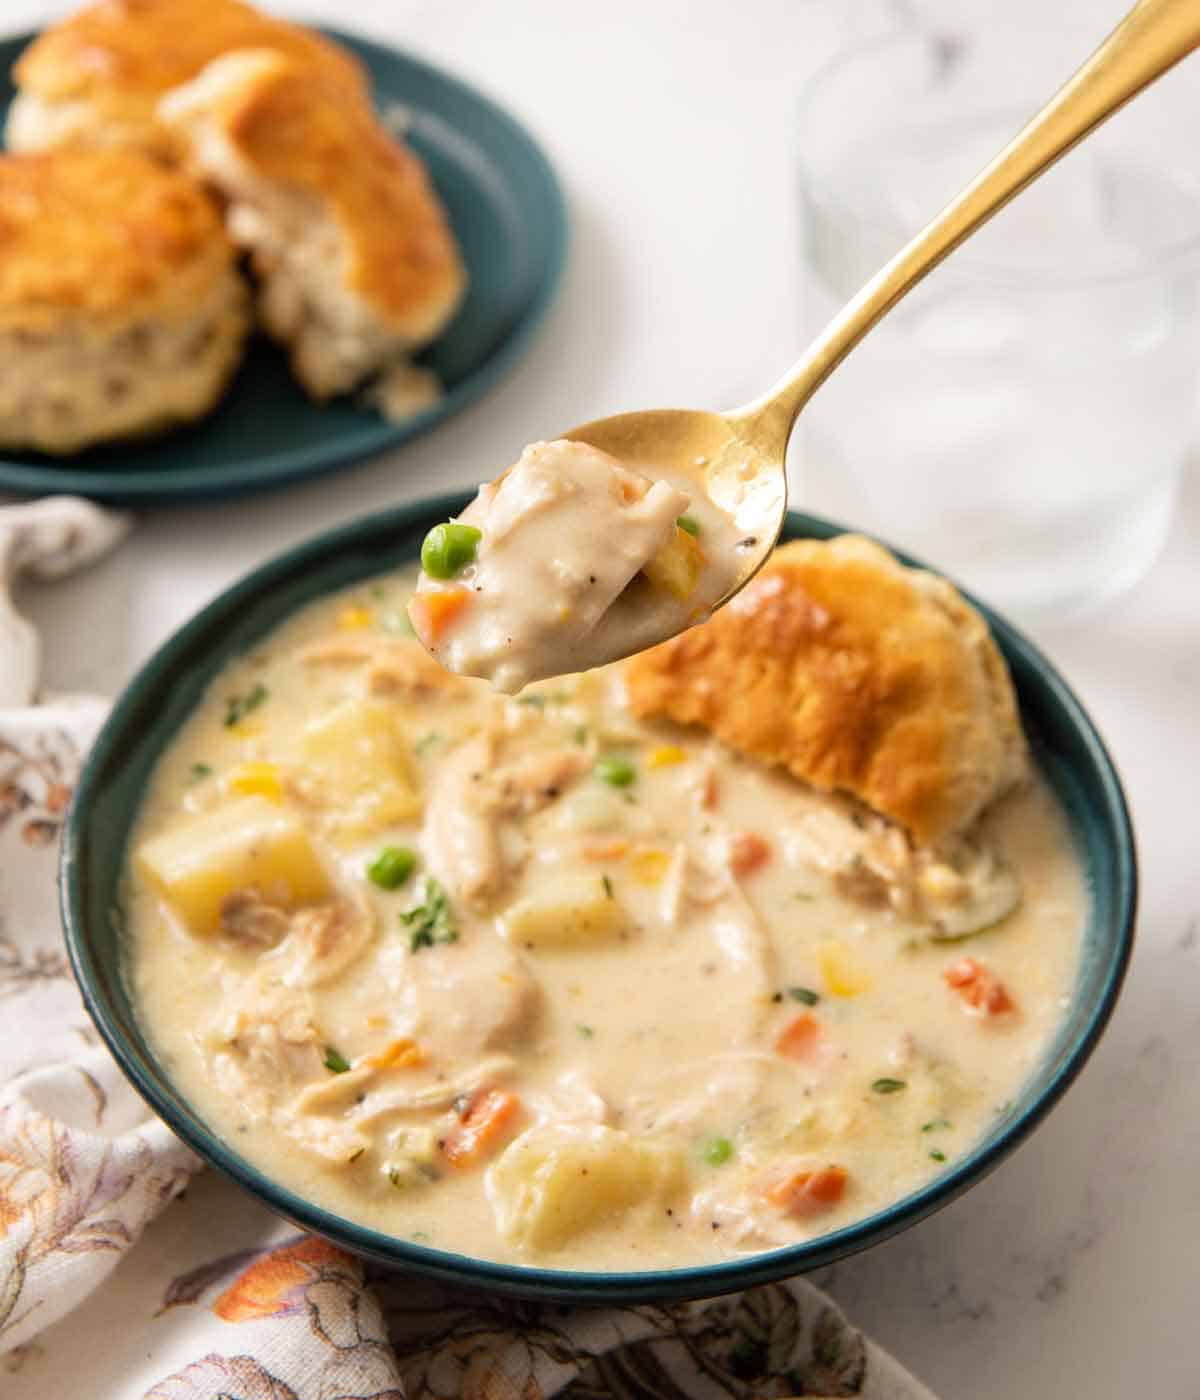 A spoonful of chicken pot pie soup lifted from the bowl with additional biscuits in the background.